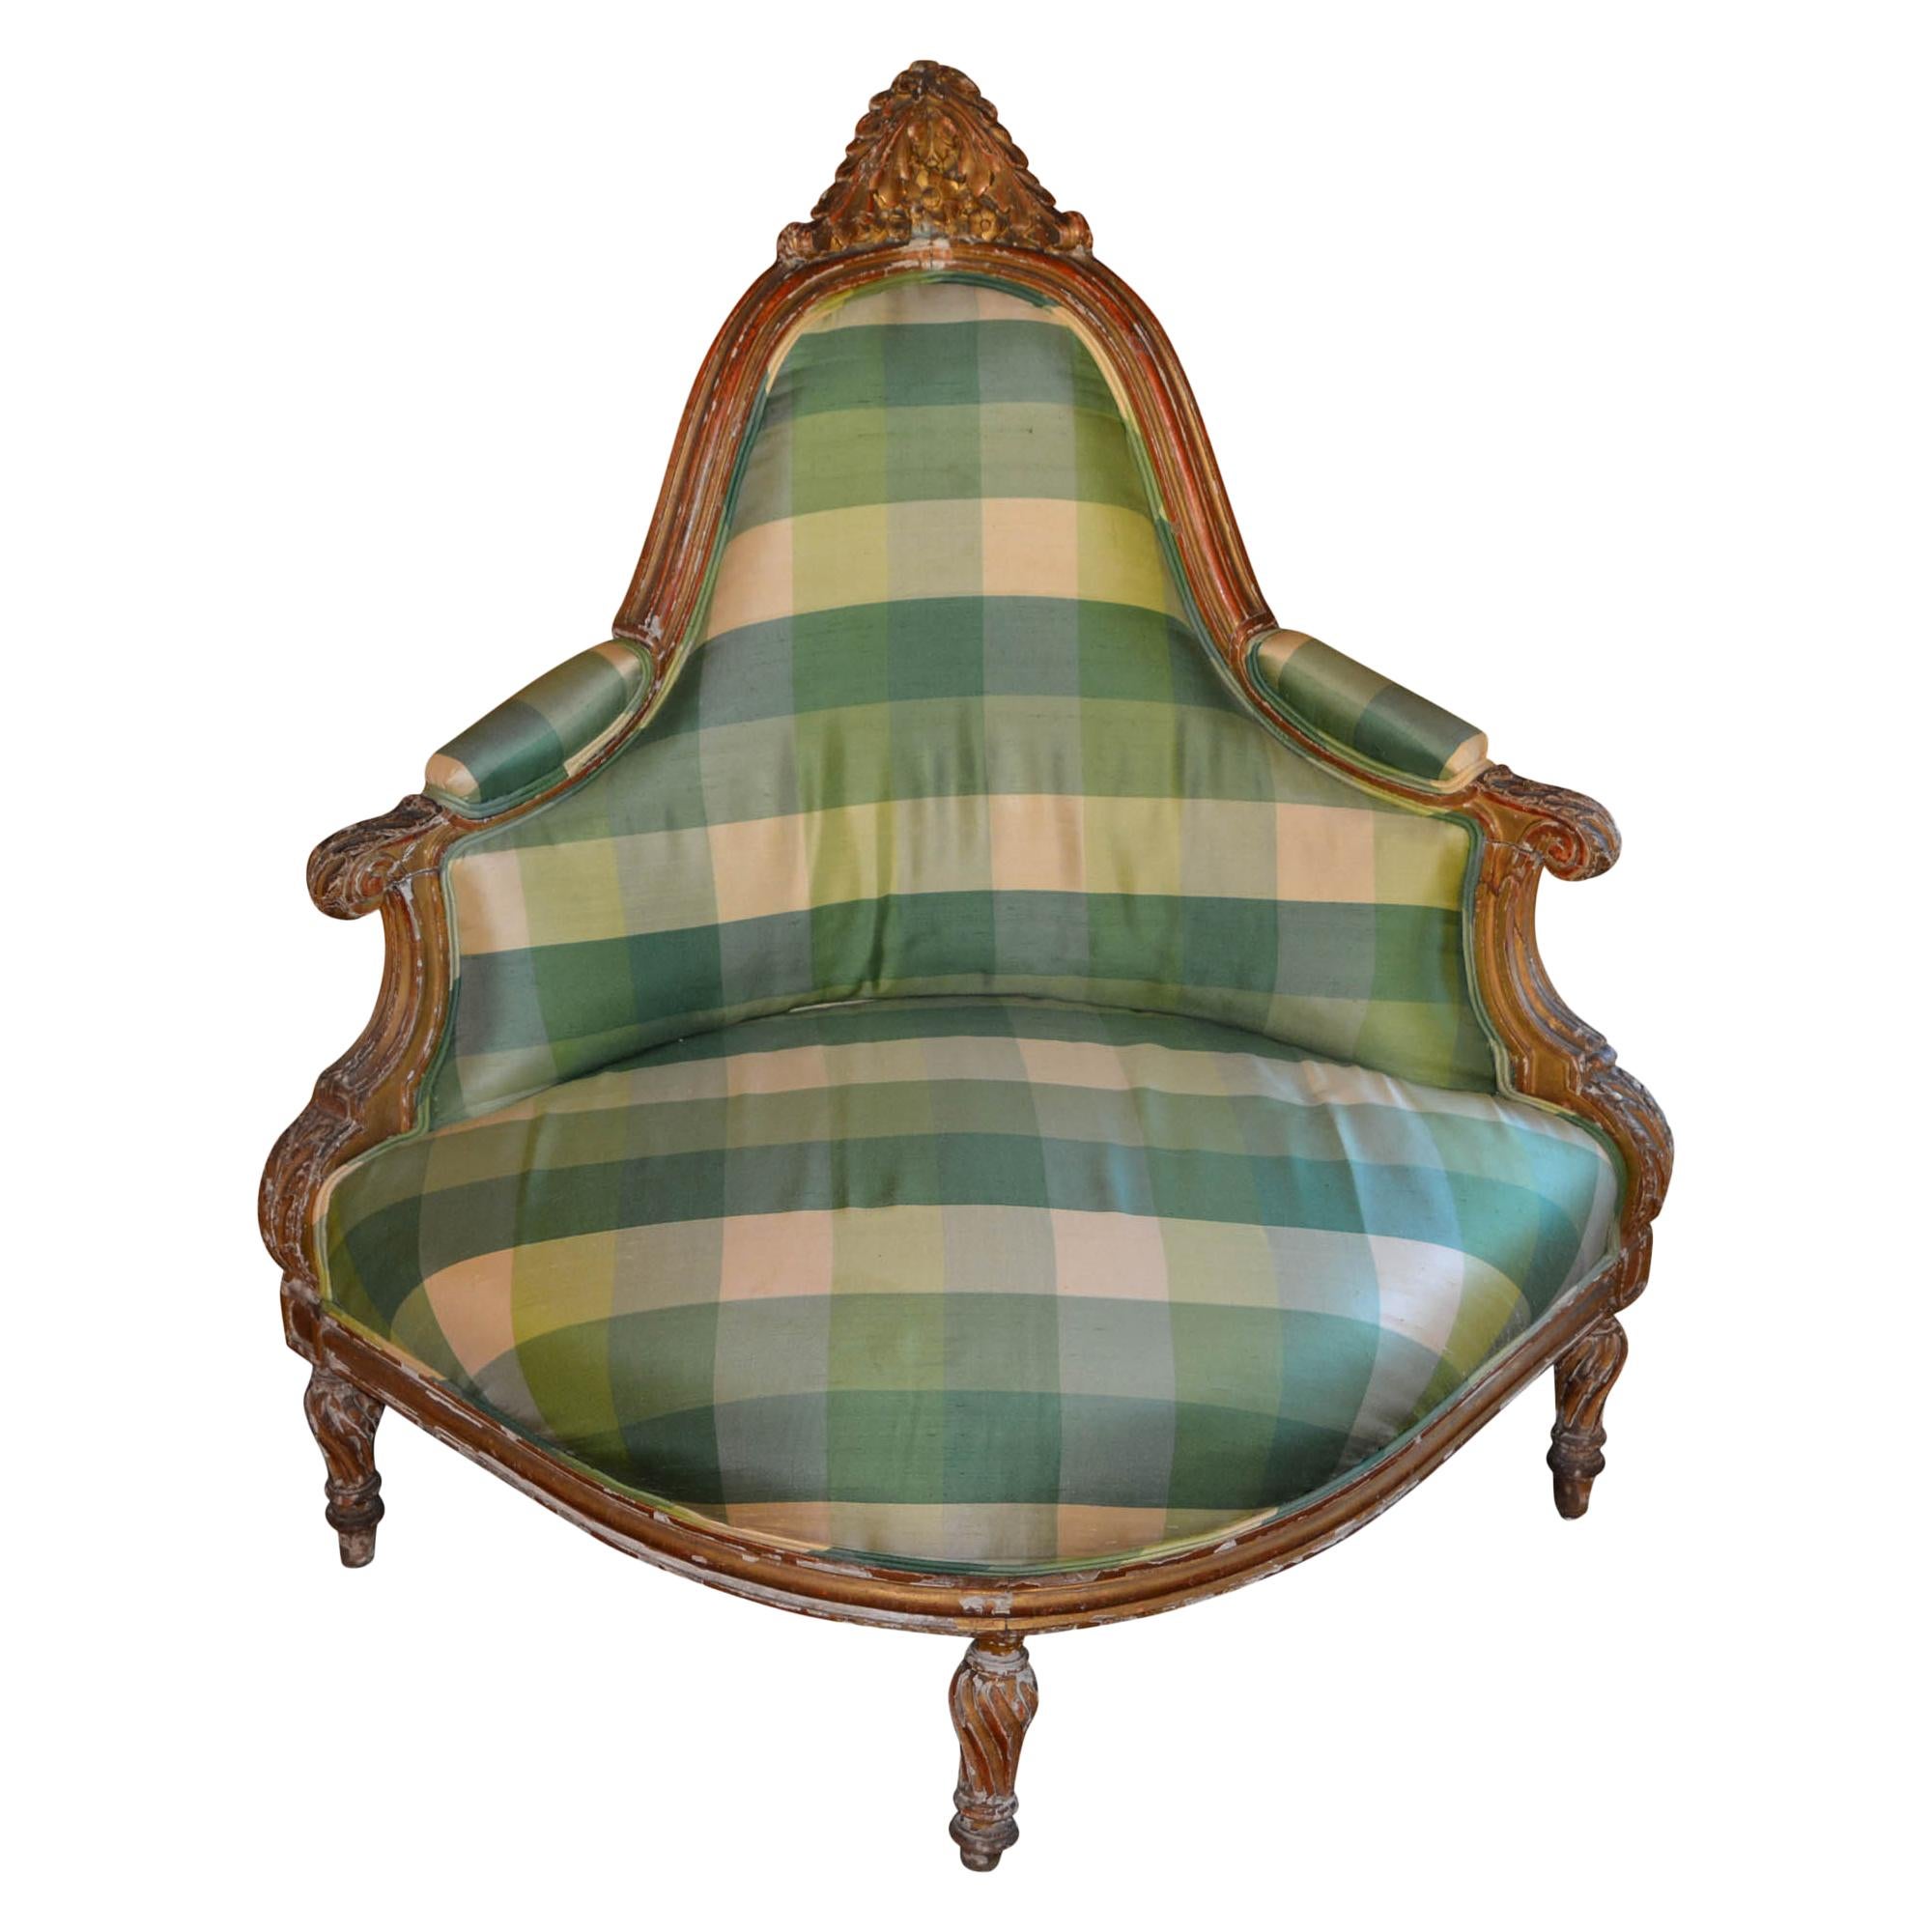 Antique Carved Corner Chair Silk Plaid Upholstery For Sale